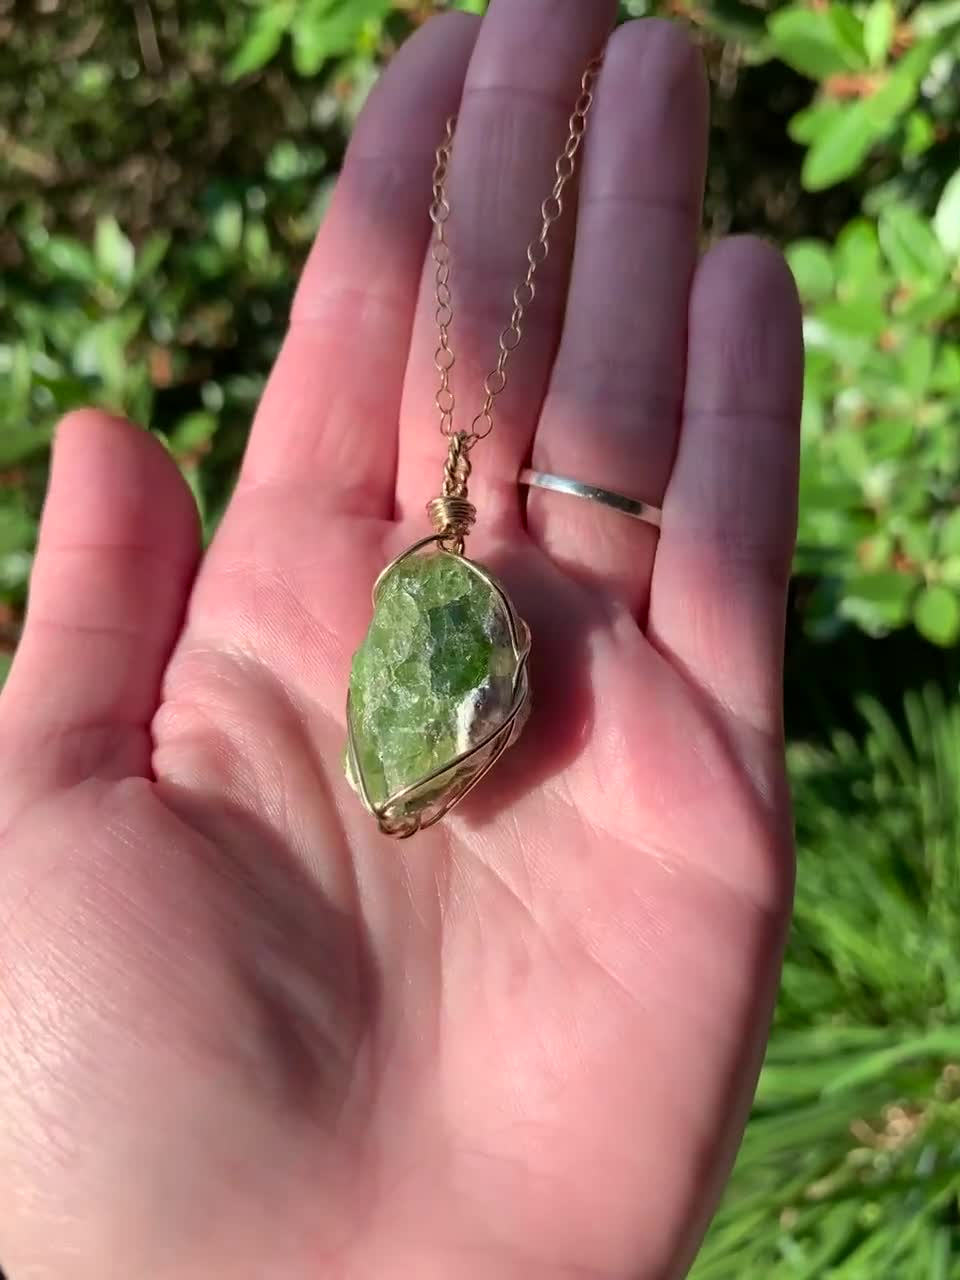 Peridot Raw Crystal Pendant Necklace in Sterling Silver : Amazon.co.uk:  Handmade Products